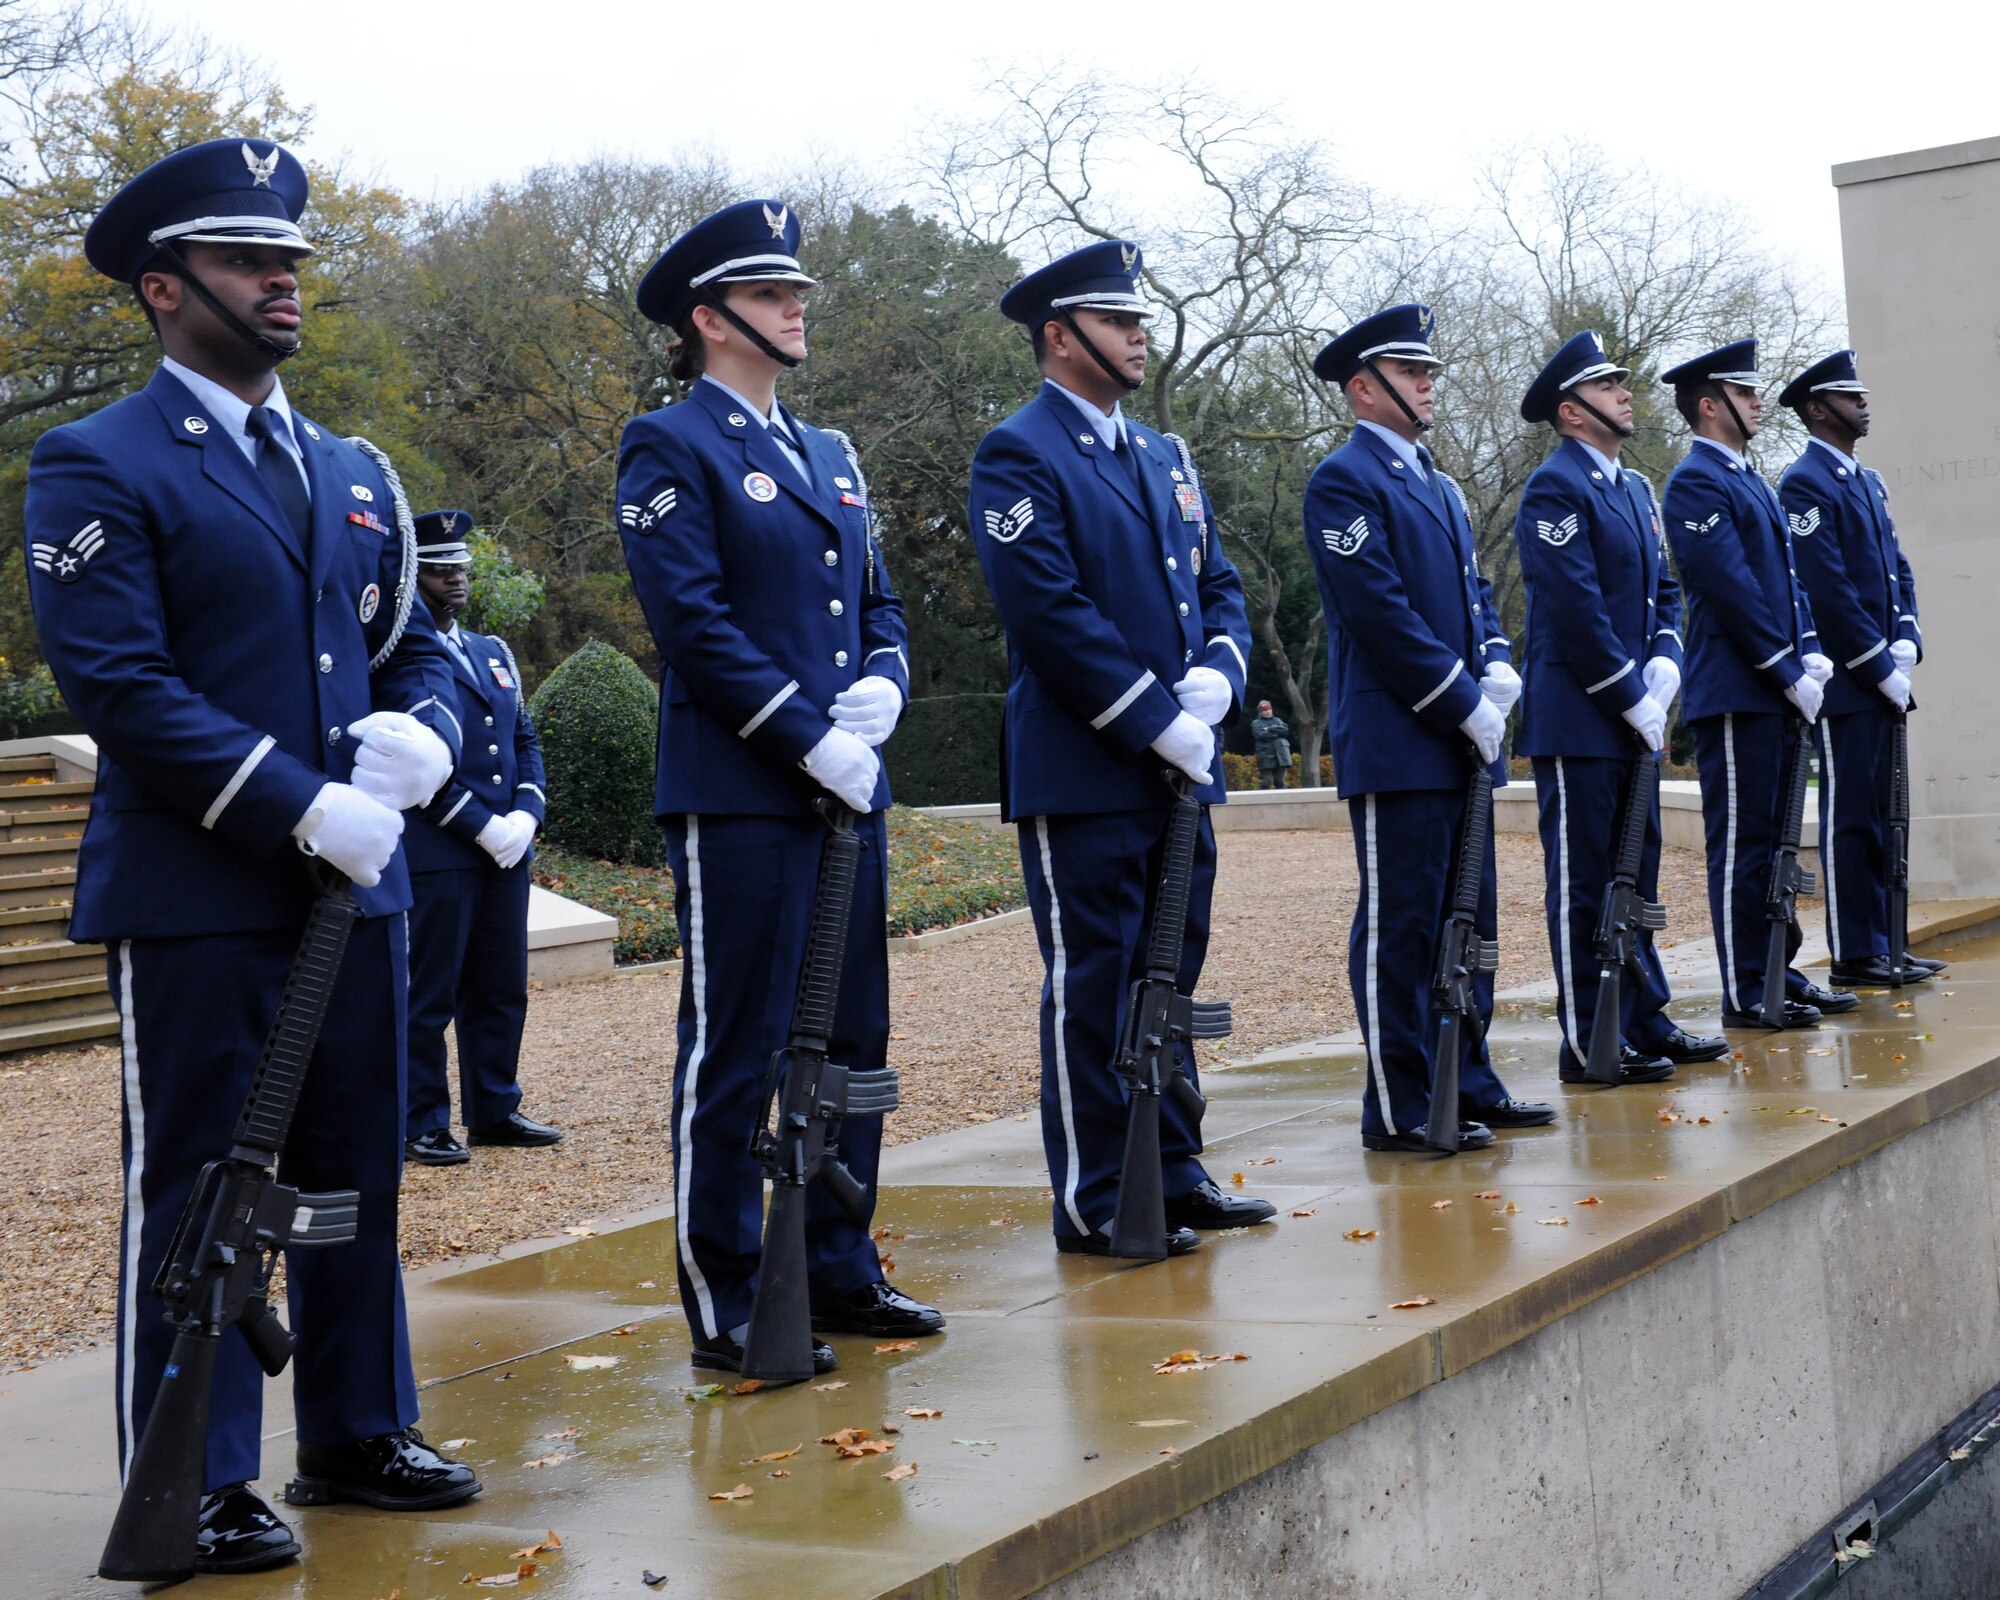 CAMBRIDGE - The 423rd Air Base Group Honor Guard stands ready during a Veteran's Day ceremony at Madingley American Cemetery Nov. 11. (U.S. Air Force photo by Staff Sgt. Joel Mease)